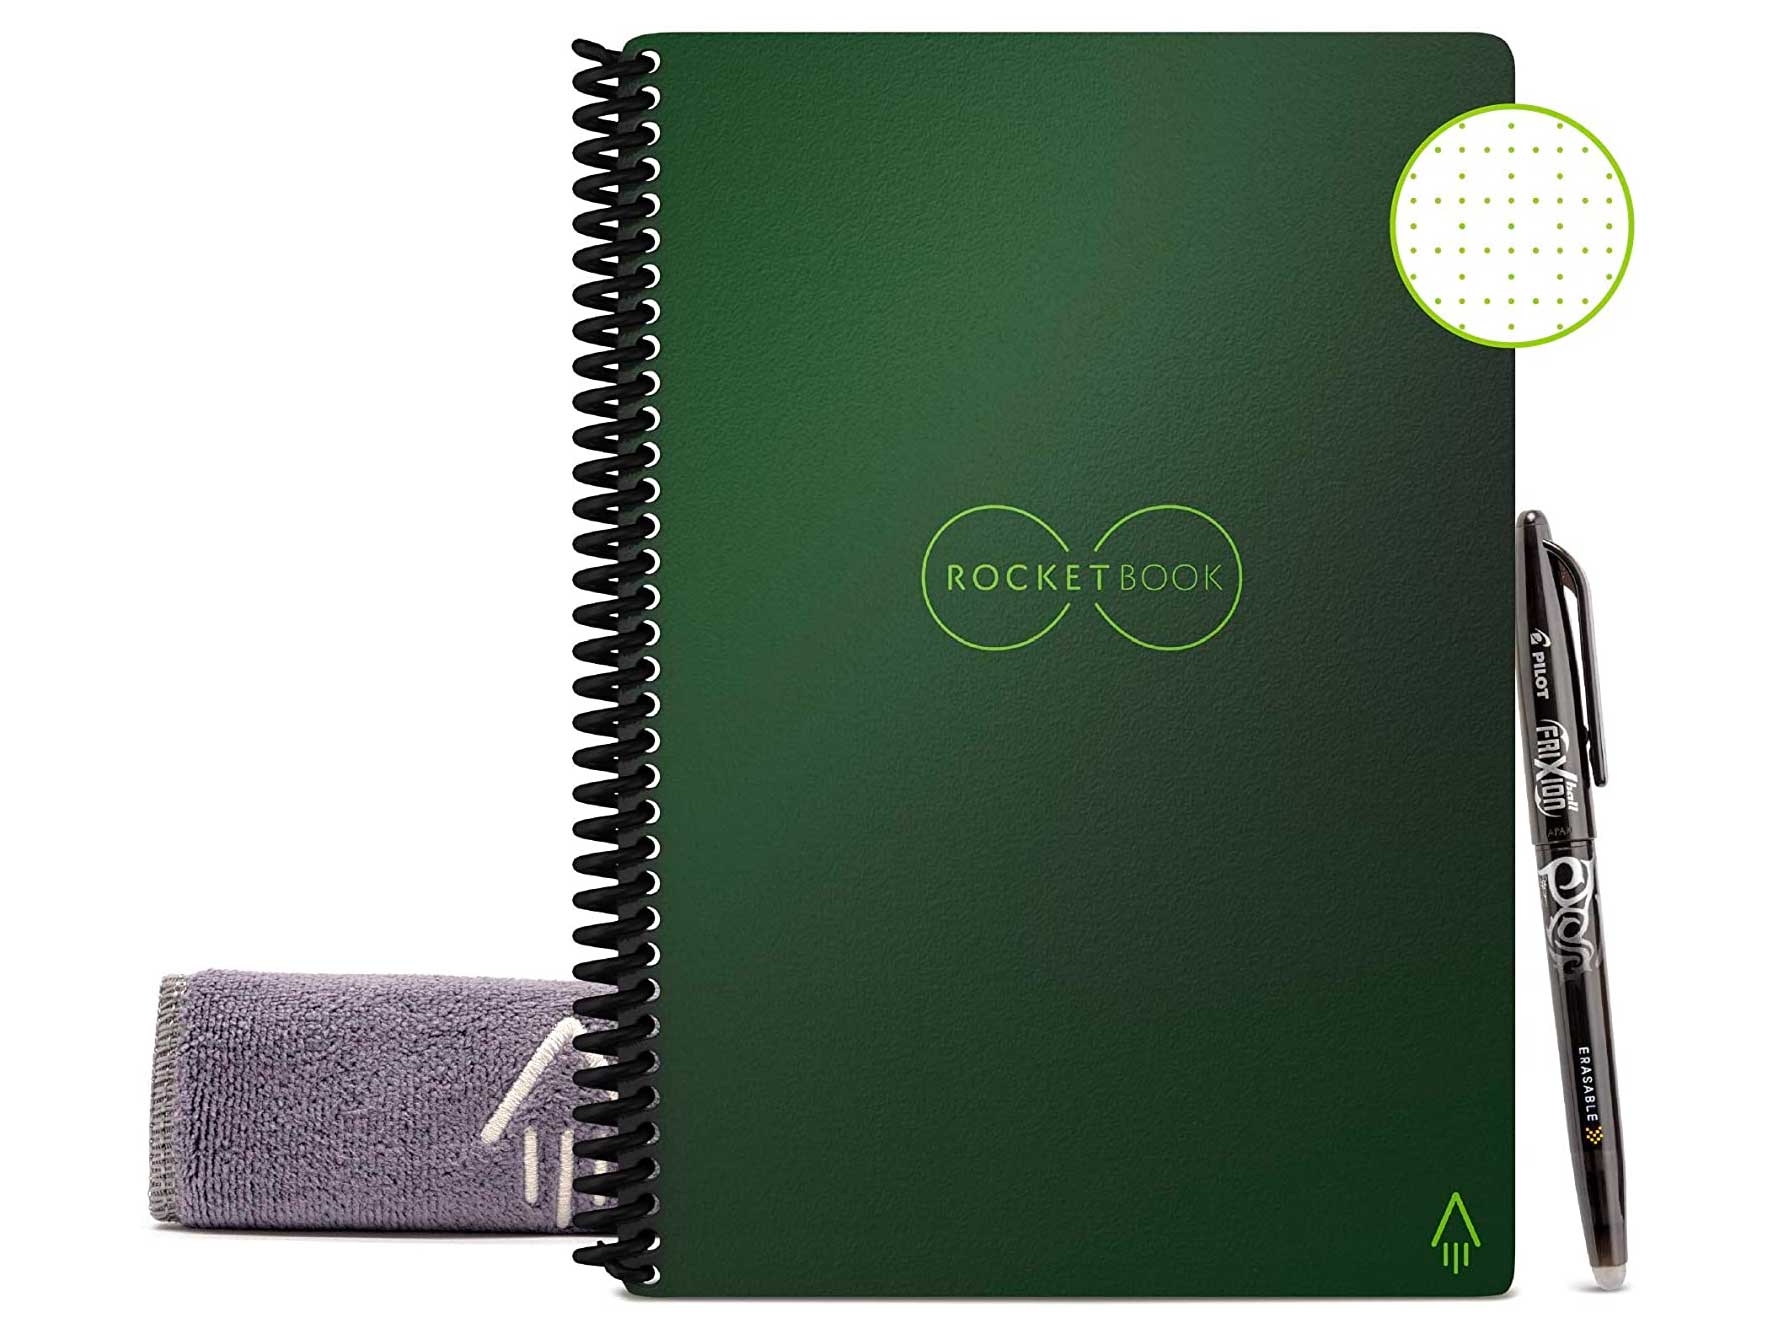 Rocketbook Smart Reusable Notebook - Dot-Grid Eco-Friendly Notebook with 1 Pilot Frixion Pen & 1 Microfiber Cloth Included - Terrestrial Green Cover, Executive Size (6